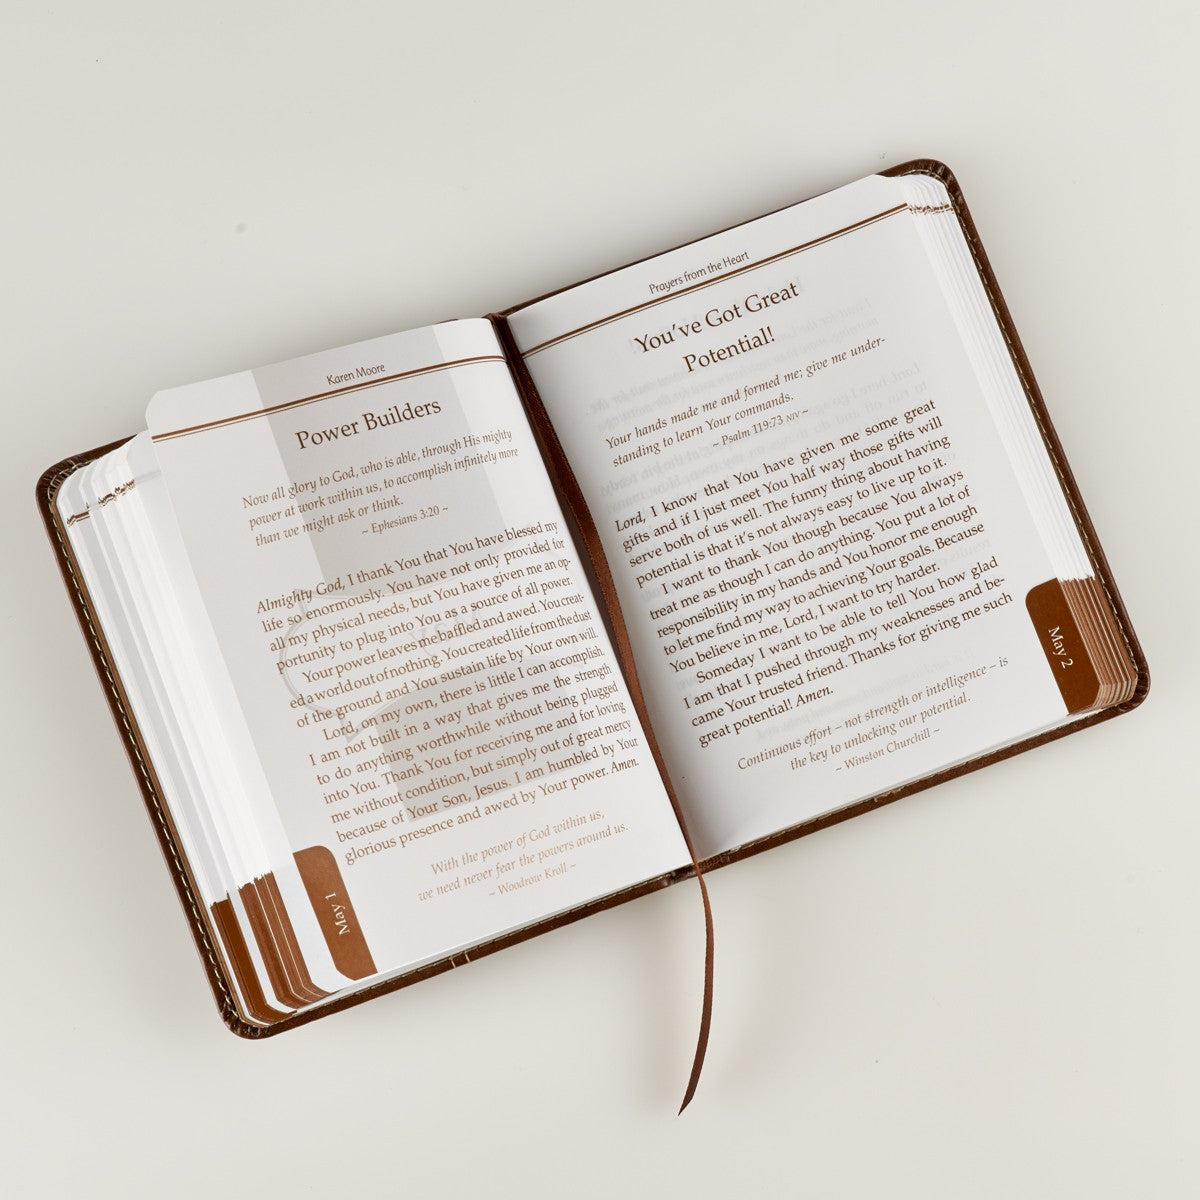 Prayers From the Heart Brown Faux Leather One-Minute Devotions